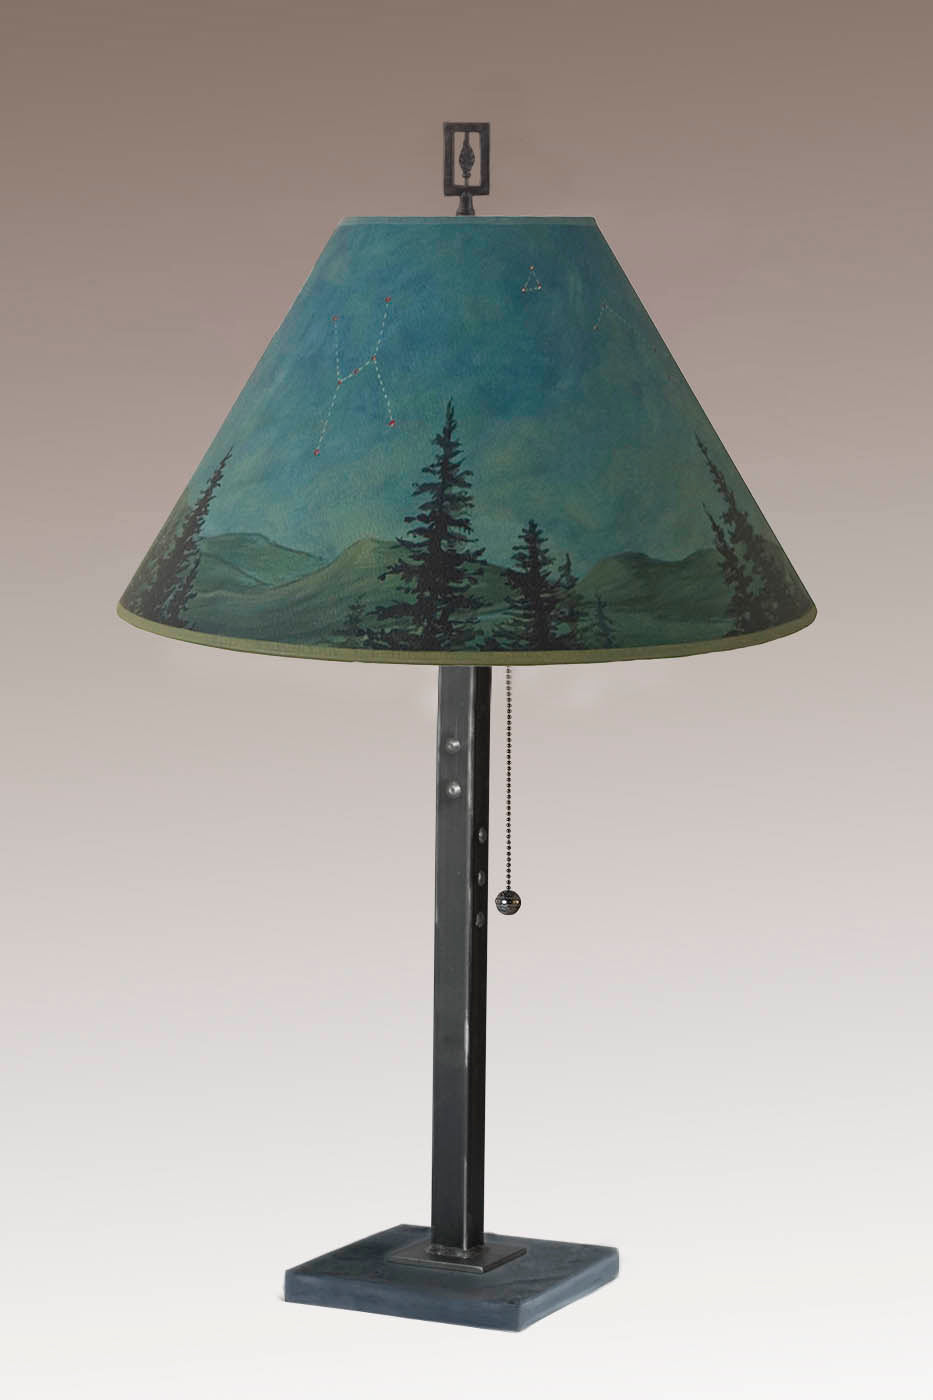 Janna Ugone & Co Table Lamps Steel Table Lamp with Medium Conical Shade in Midnight Sky